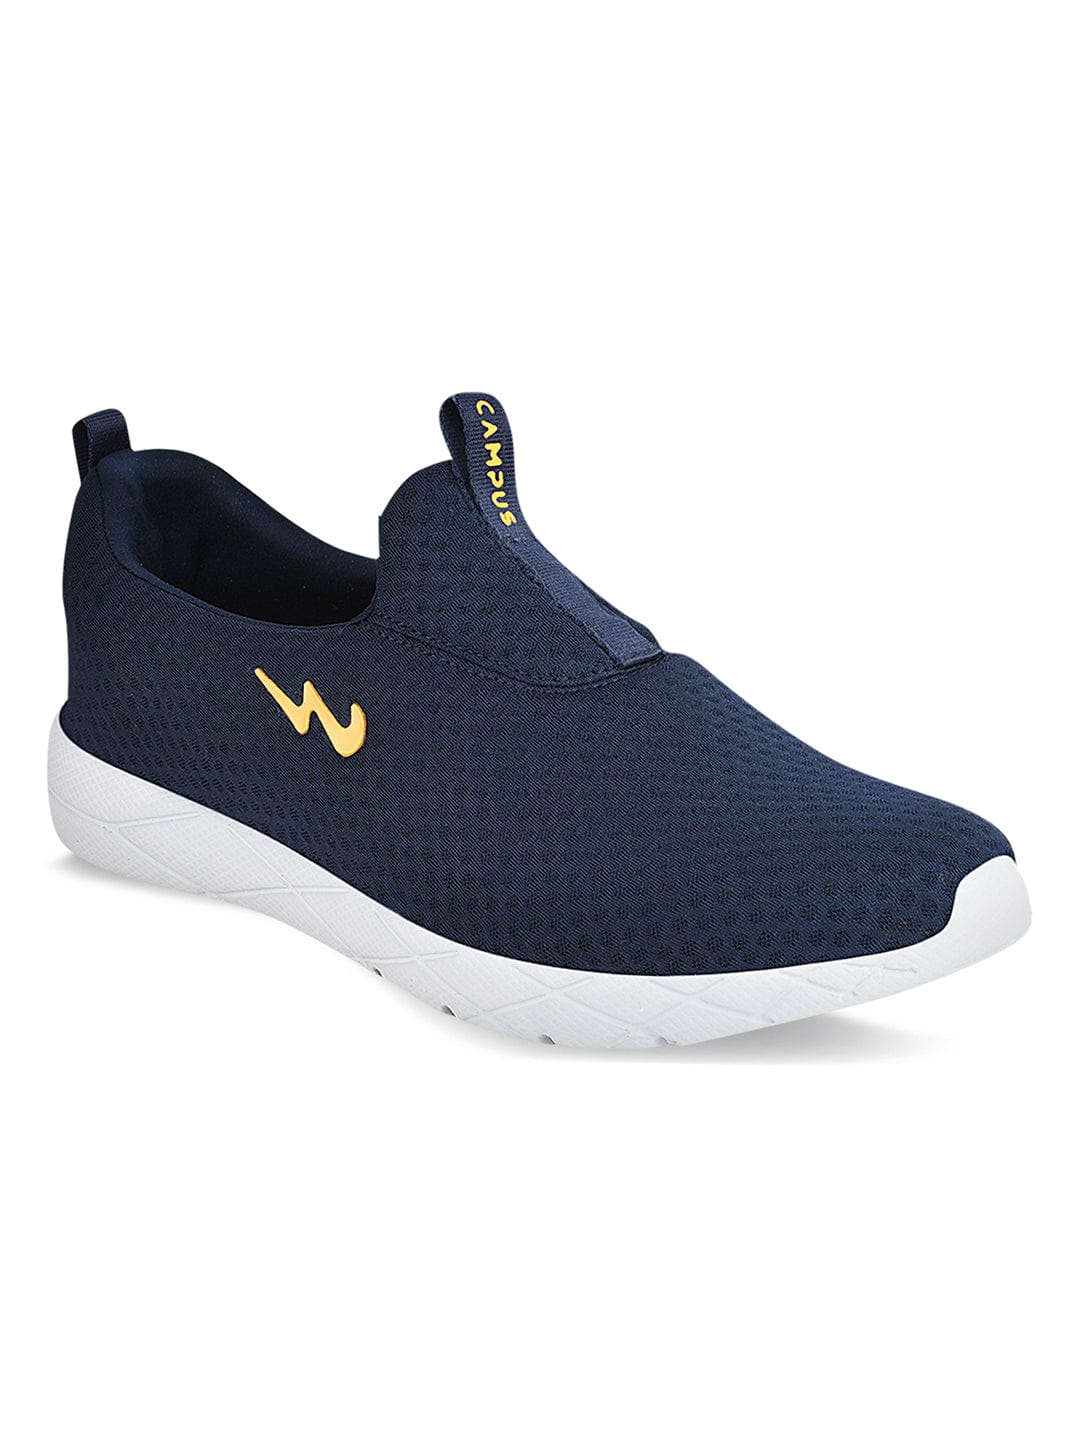 VAO V-01 Sports Running Walking & Gym LightWeight Stylish Shoes for Boys &  Men with 8MM Memory foam Insole